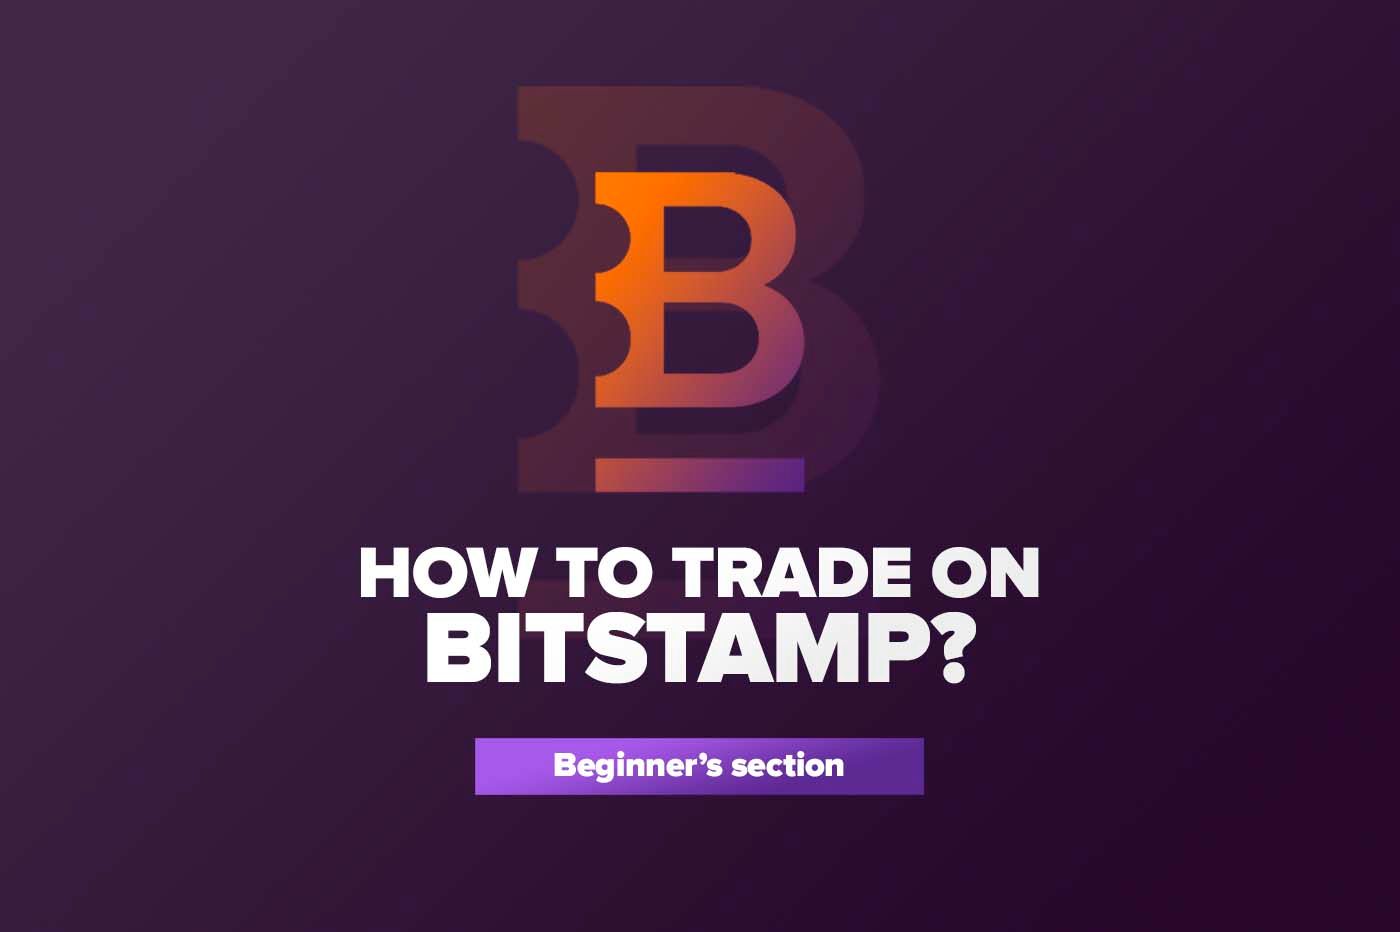 How to trade on BITSTAMP?